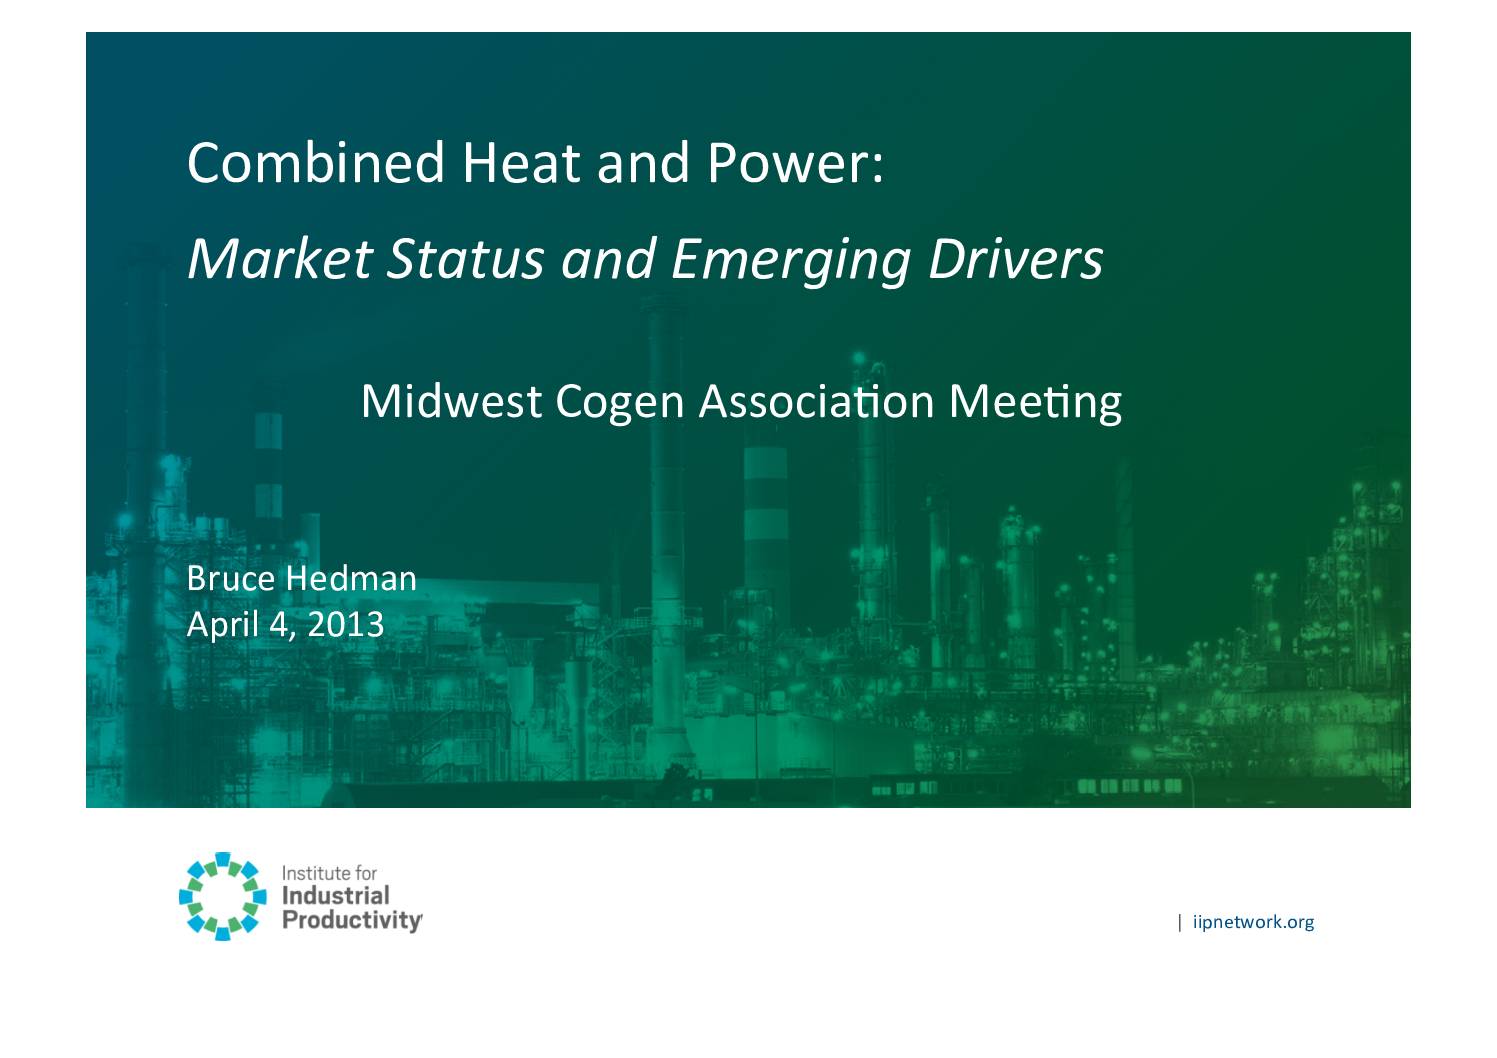 Midwest Cogeneration Association: Market Status and Emerging Drivers of CHP in the United States